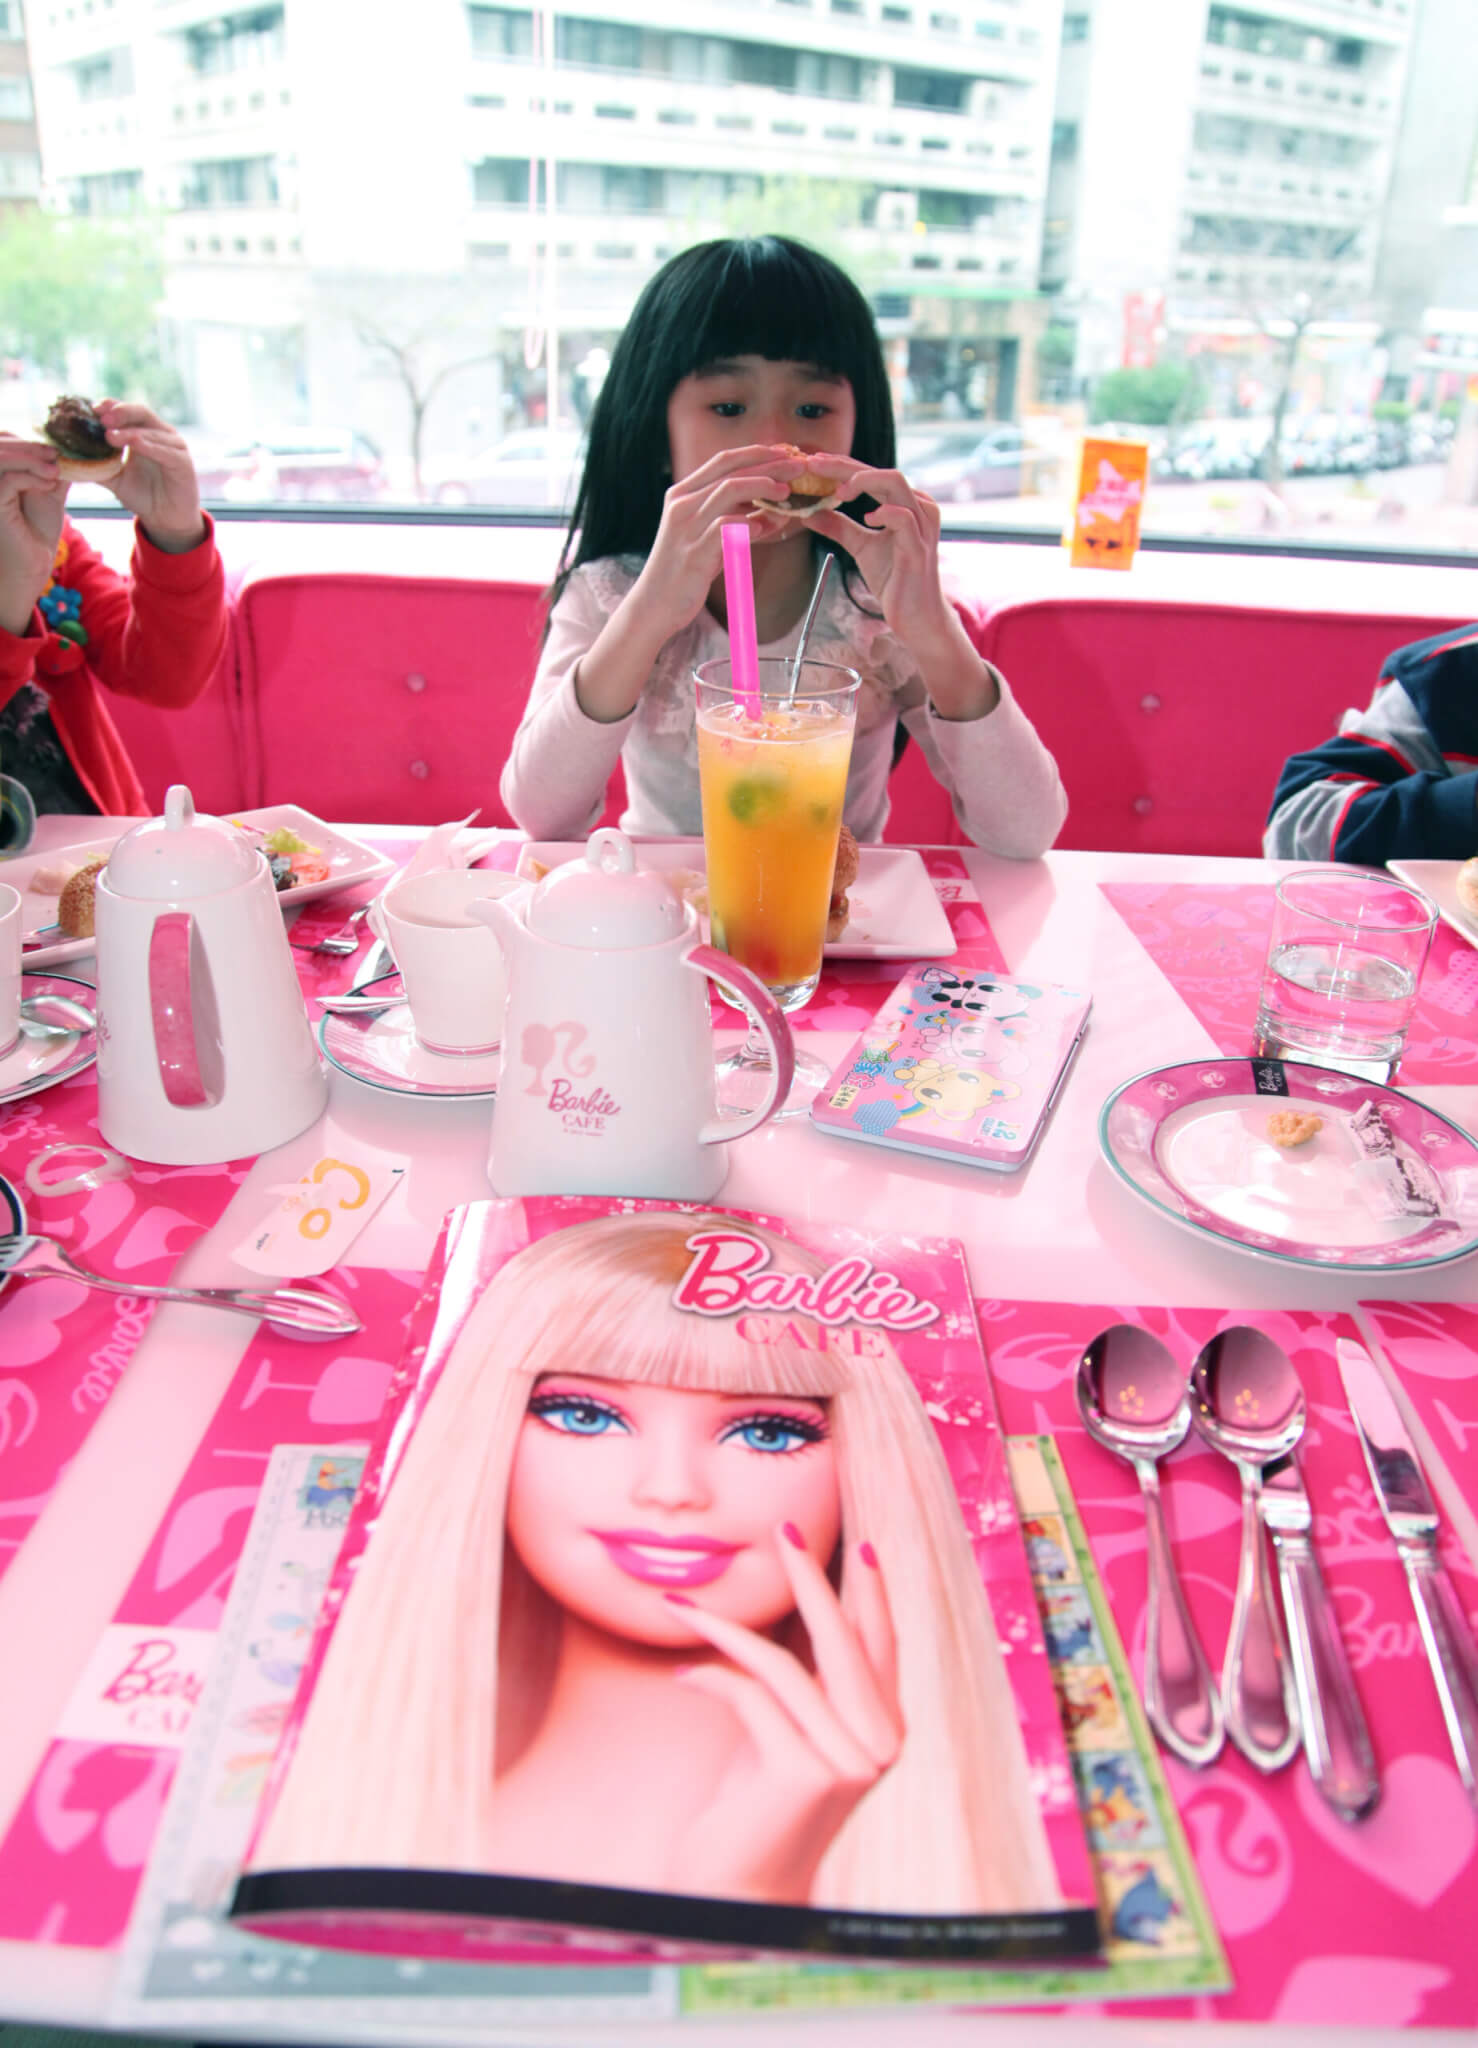 A Girl Drinks Fruit Juice at the World's First Barbie Restaurant Called Barbie Cafe in Taipei Taiwan 02 February 2013 Us Boy Company Mattel Inc Licensed a Taiwan Interior Design Firm to Launch Barbie Cafe on 30 January 2013 For Barbie Fans Sinlaku Taiwan Co Ltd Which Runs the Restaurant Said It Plans to Open More Barbie Cafes in and Outside Taiwan with the First Overseas Barbie Cafe Planned in Shanghai China Taiwan Taipei